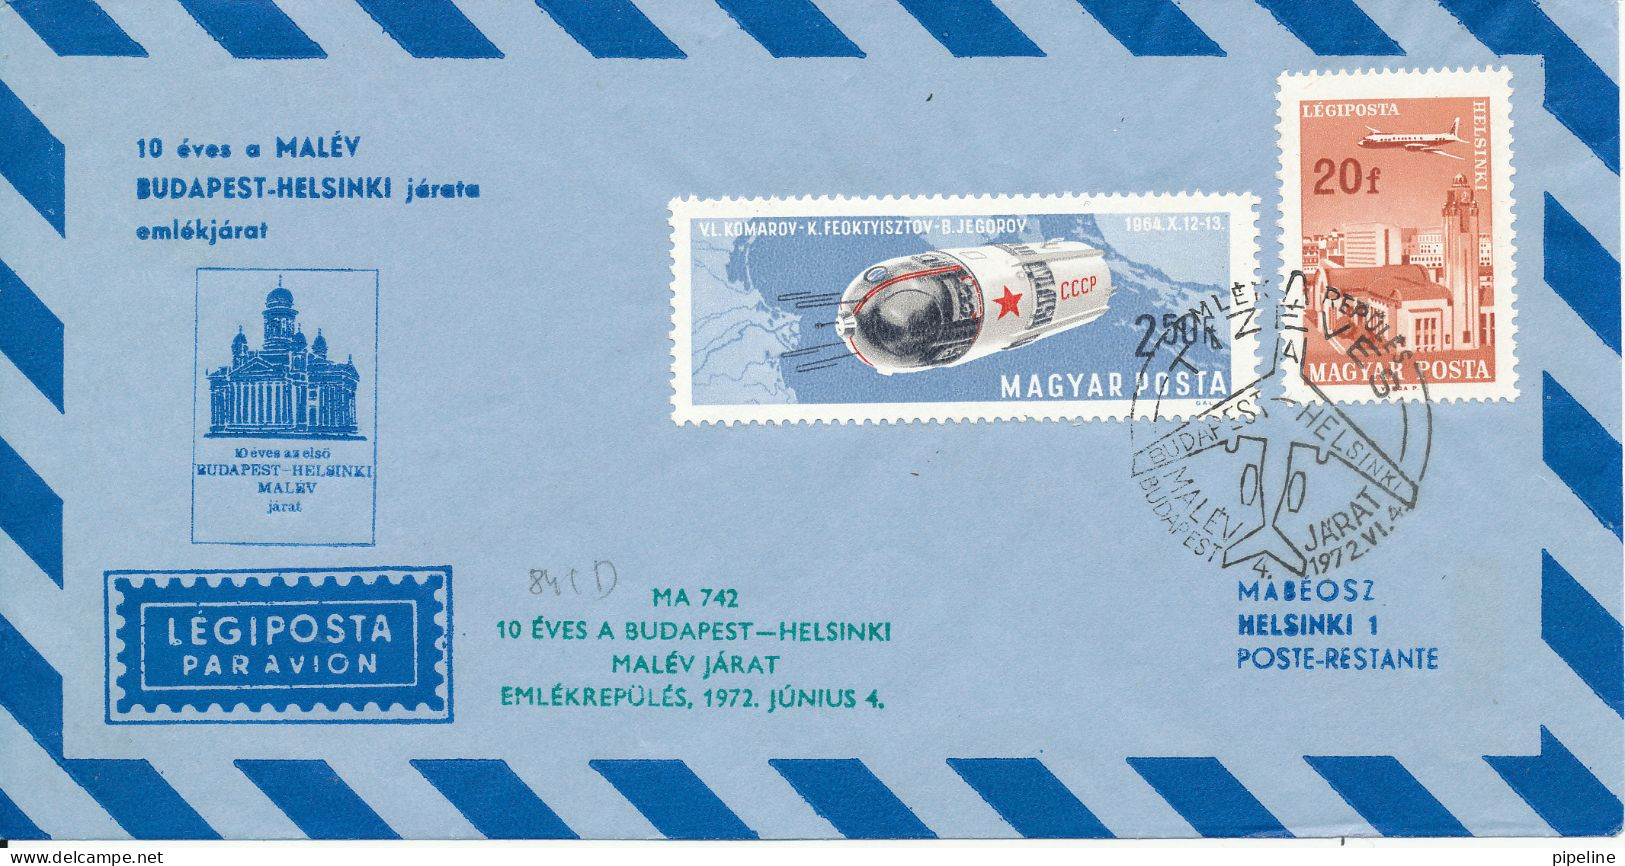 Hungary Air Mail Flight Cover Malev Budapest - Helsinki 10th Anniversary 4-6-1972 - Covers & Documents